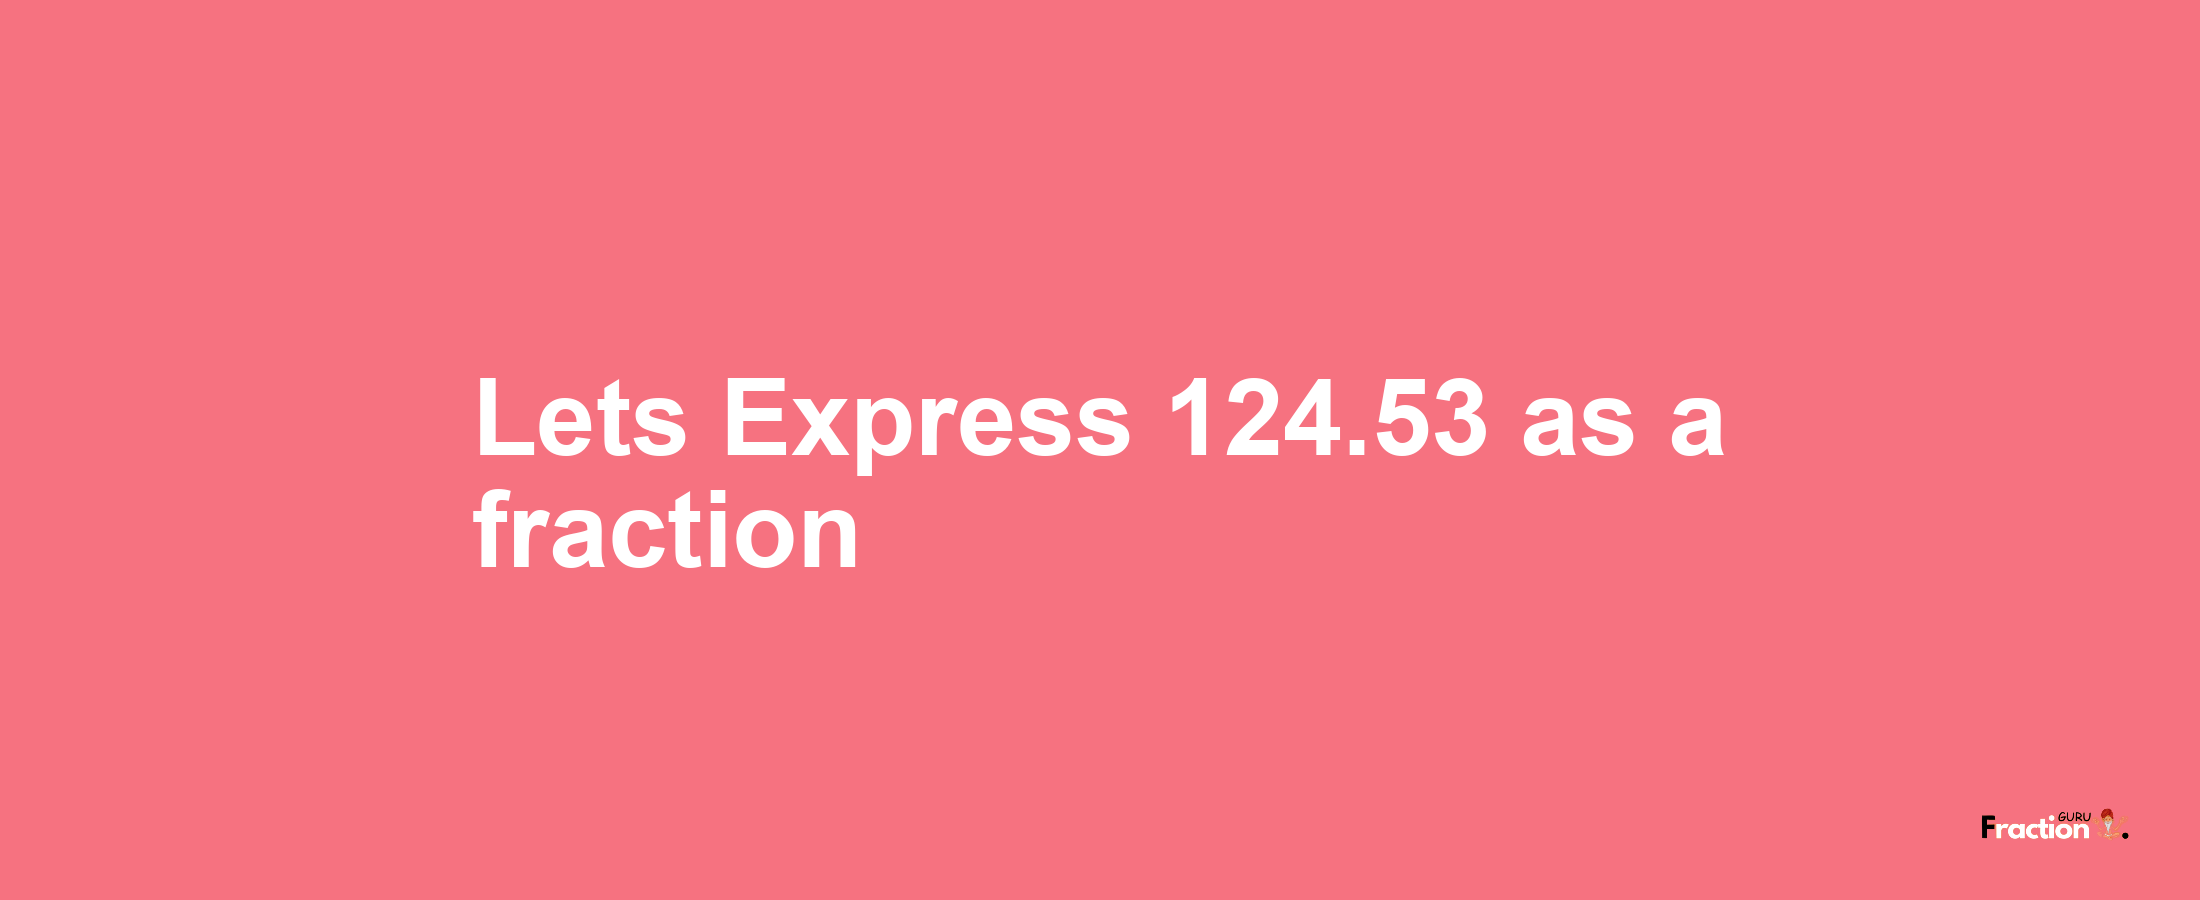 Lets Express 124.53 as afraction